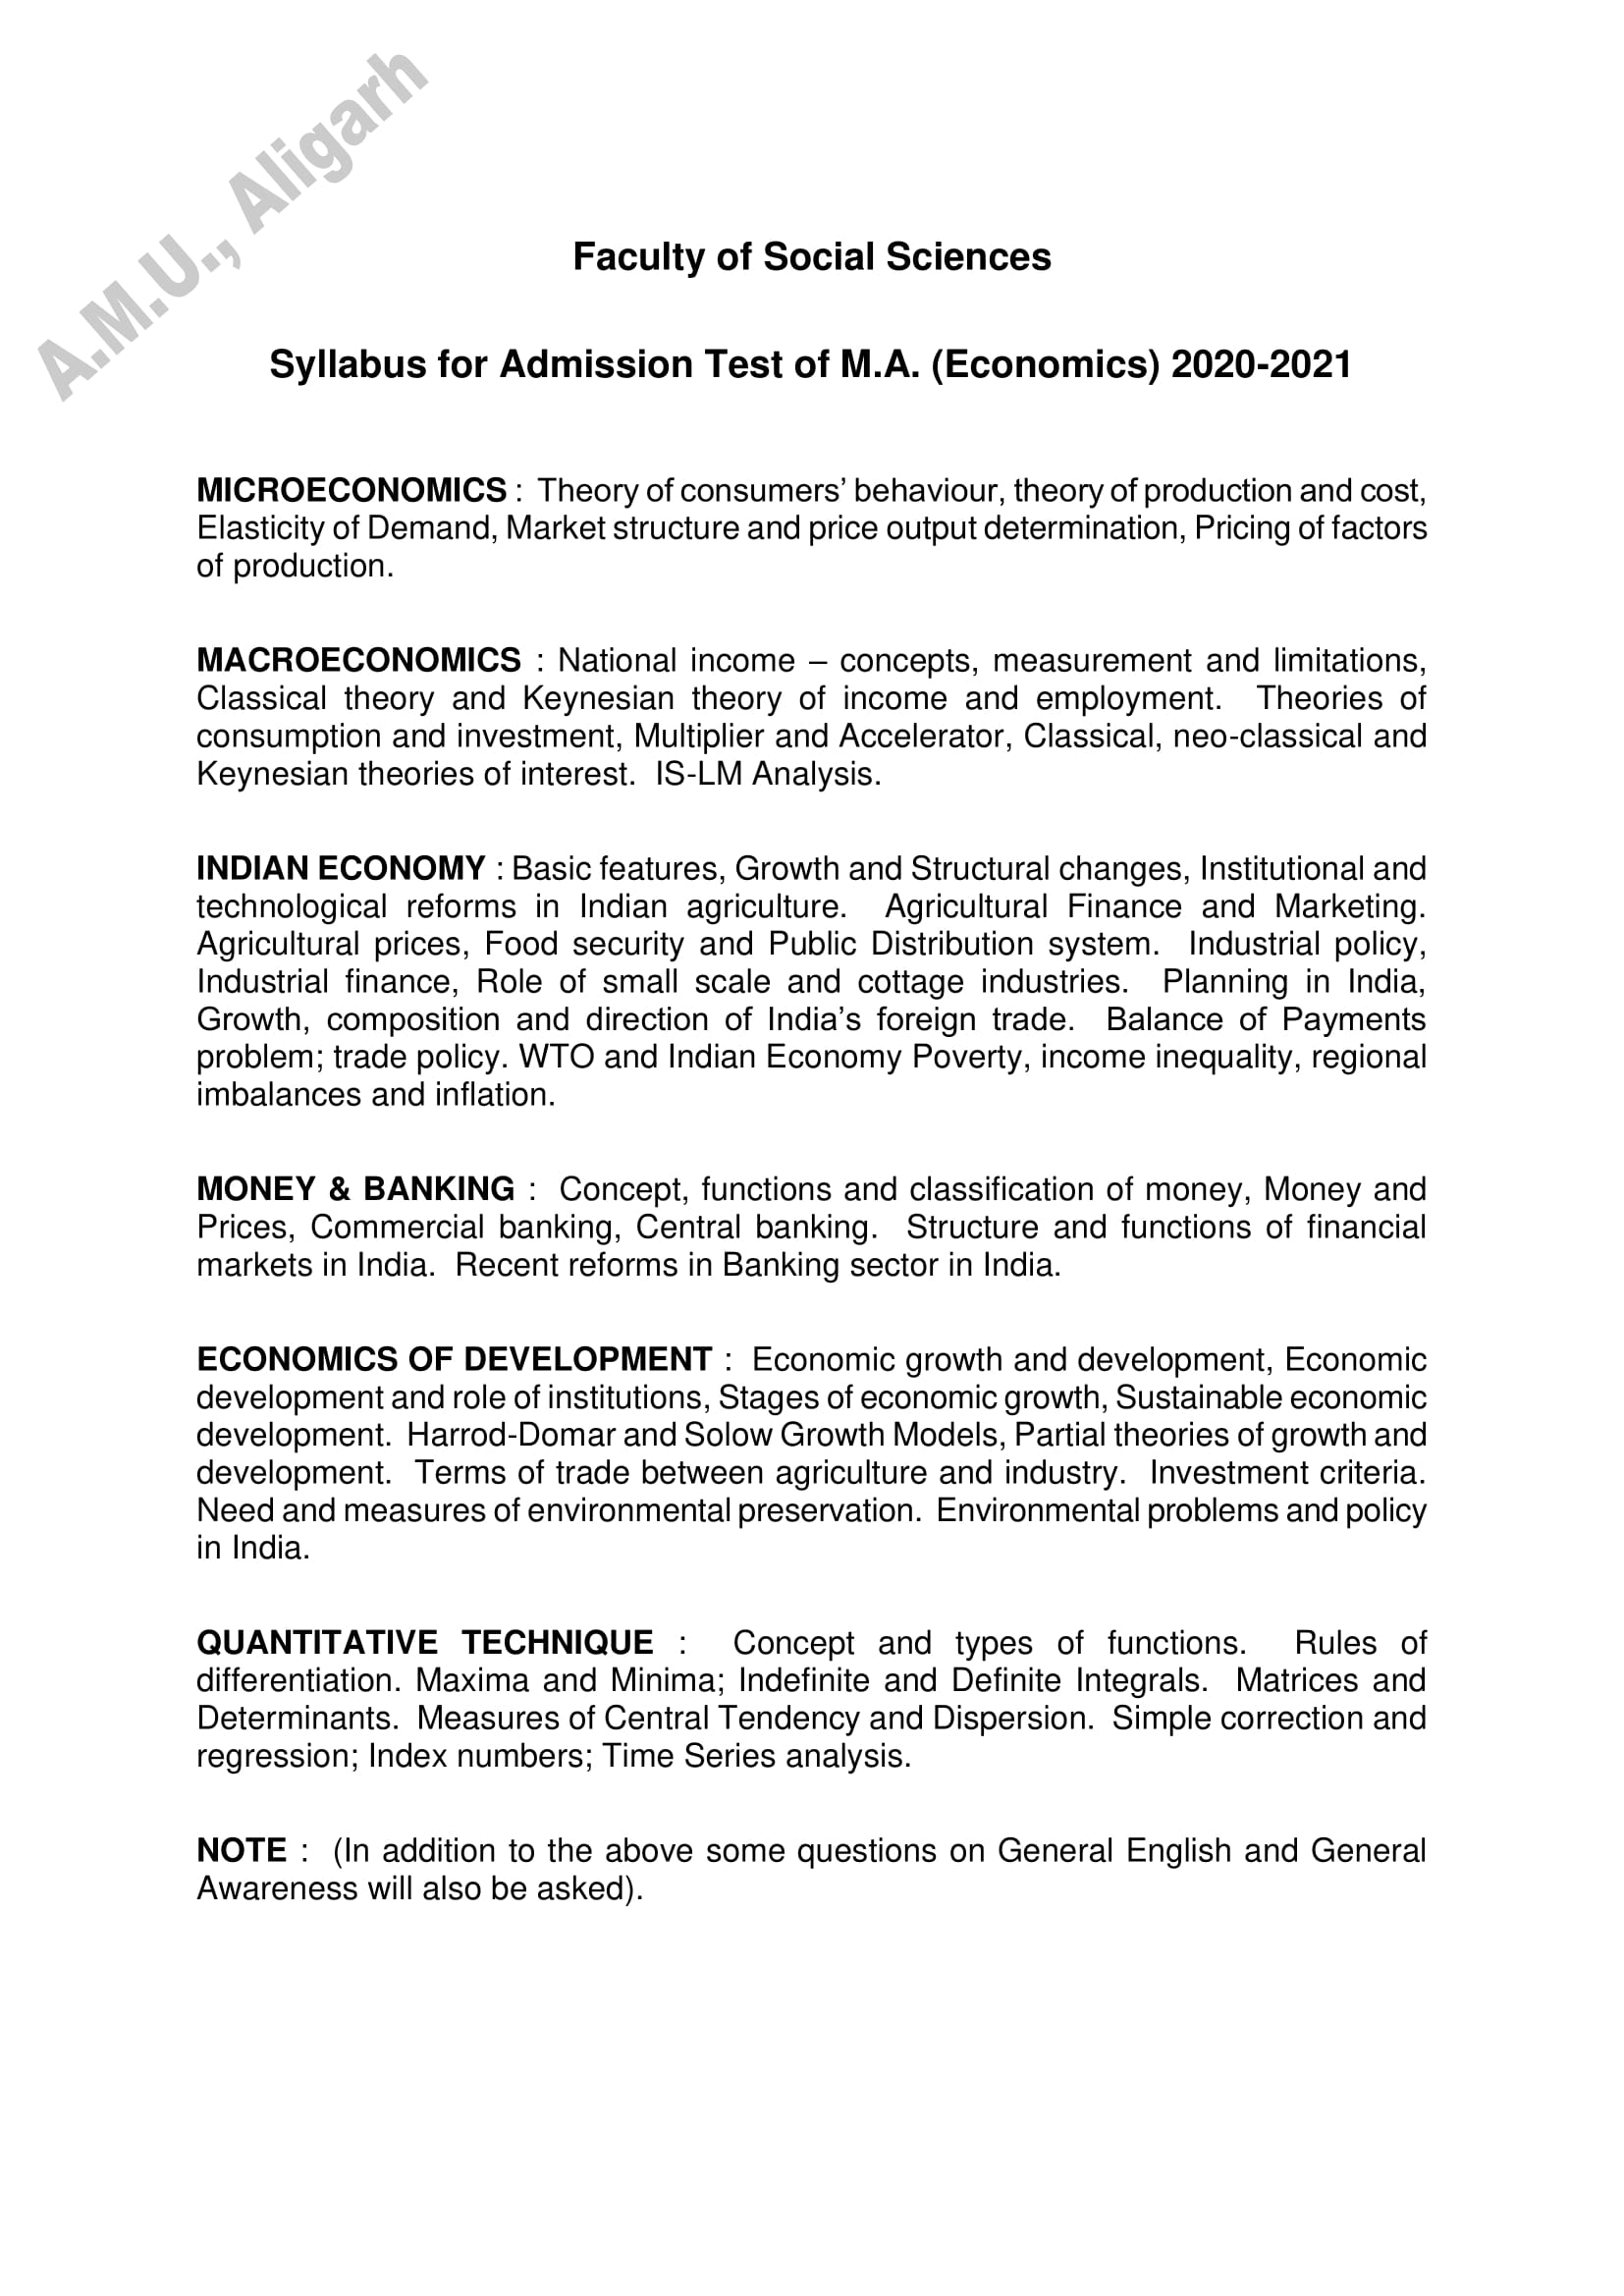 AMU Entrance Exam Syllabus for M.A. in Economics - Page 1